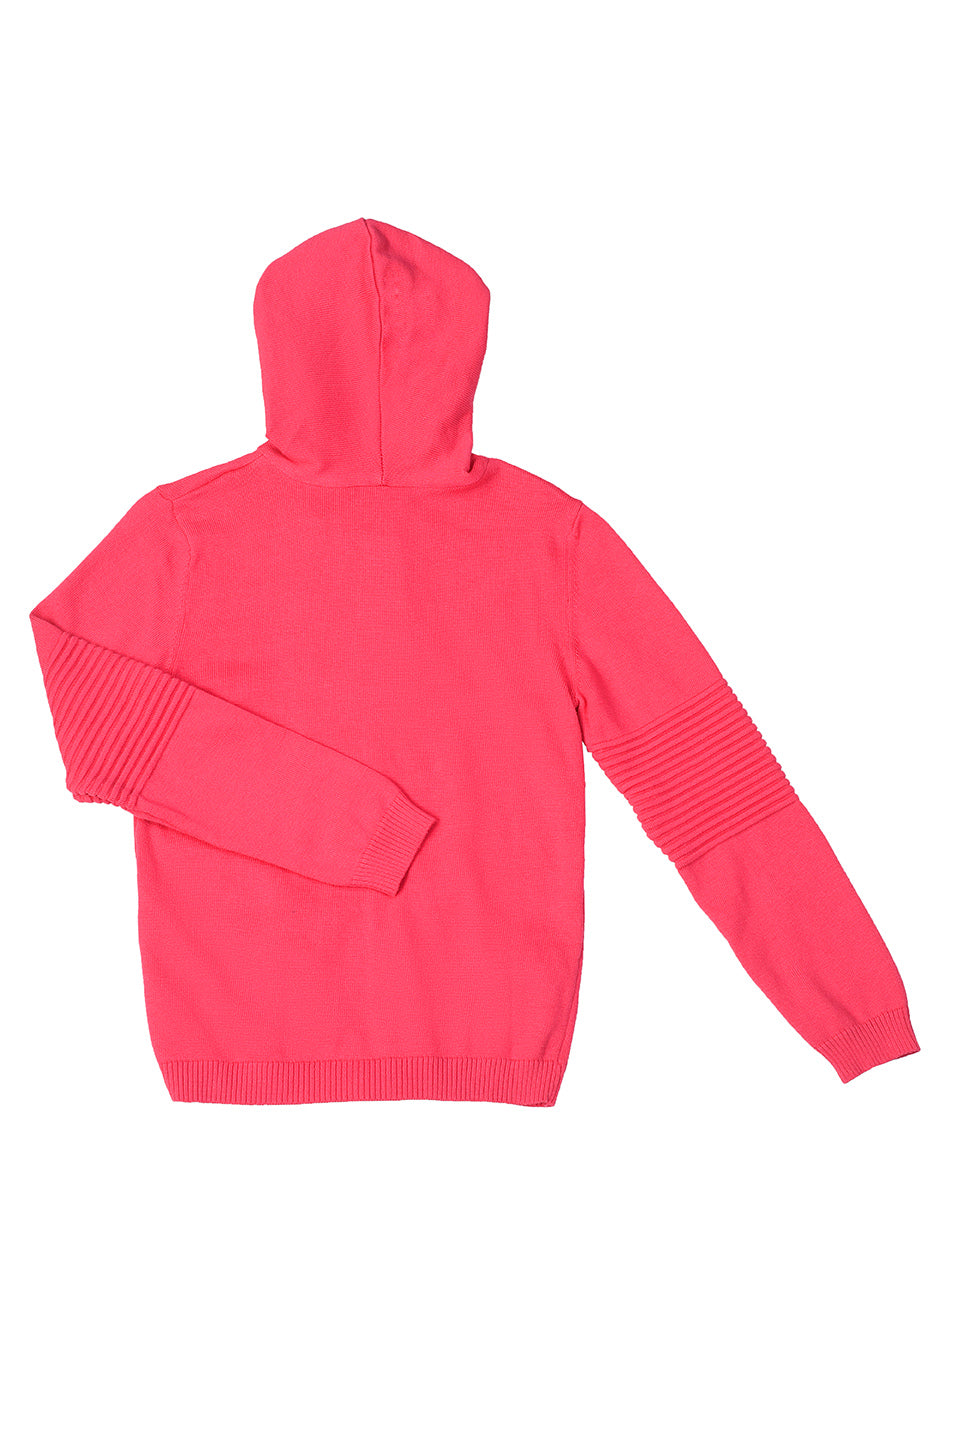 KDS-BC-12579 HOODED PULL OVER PINK